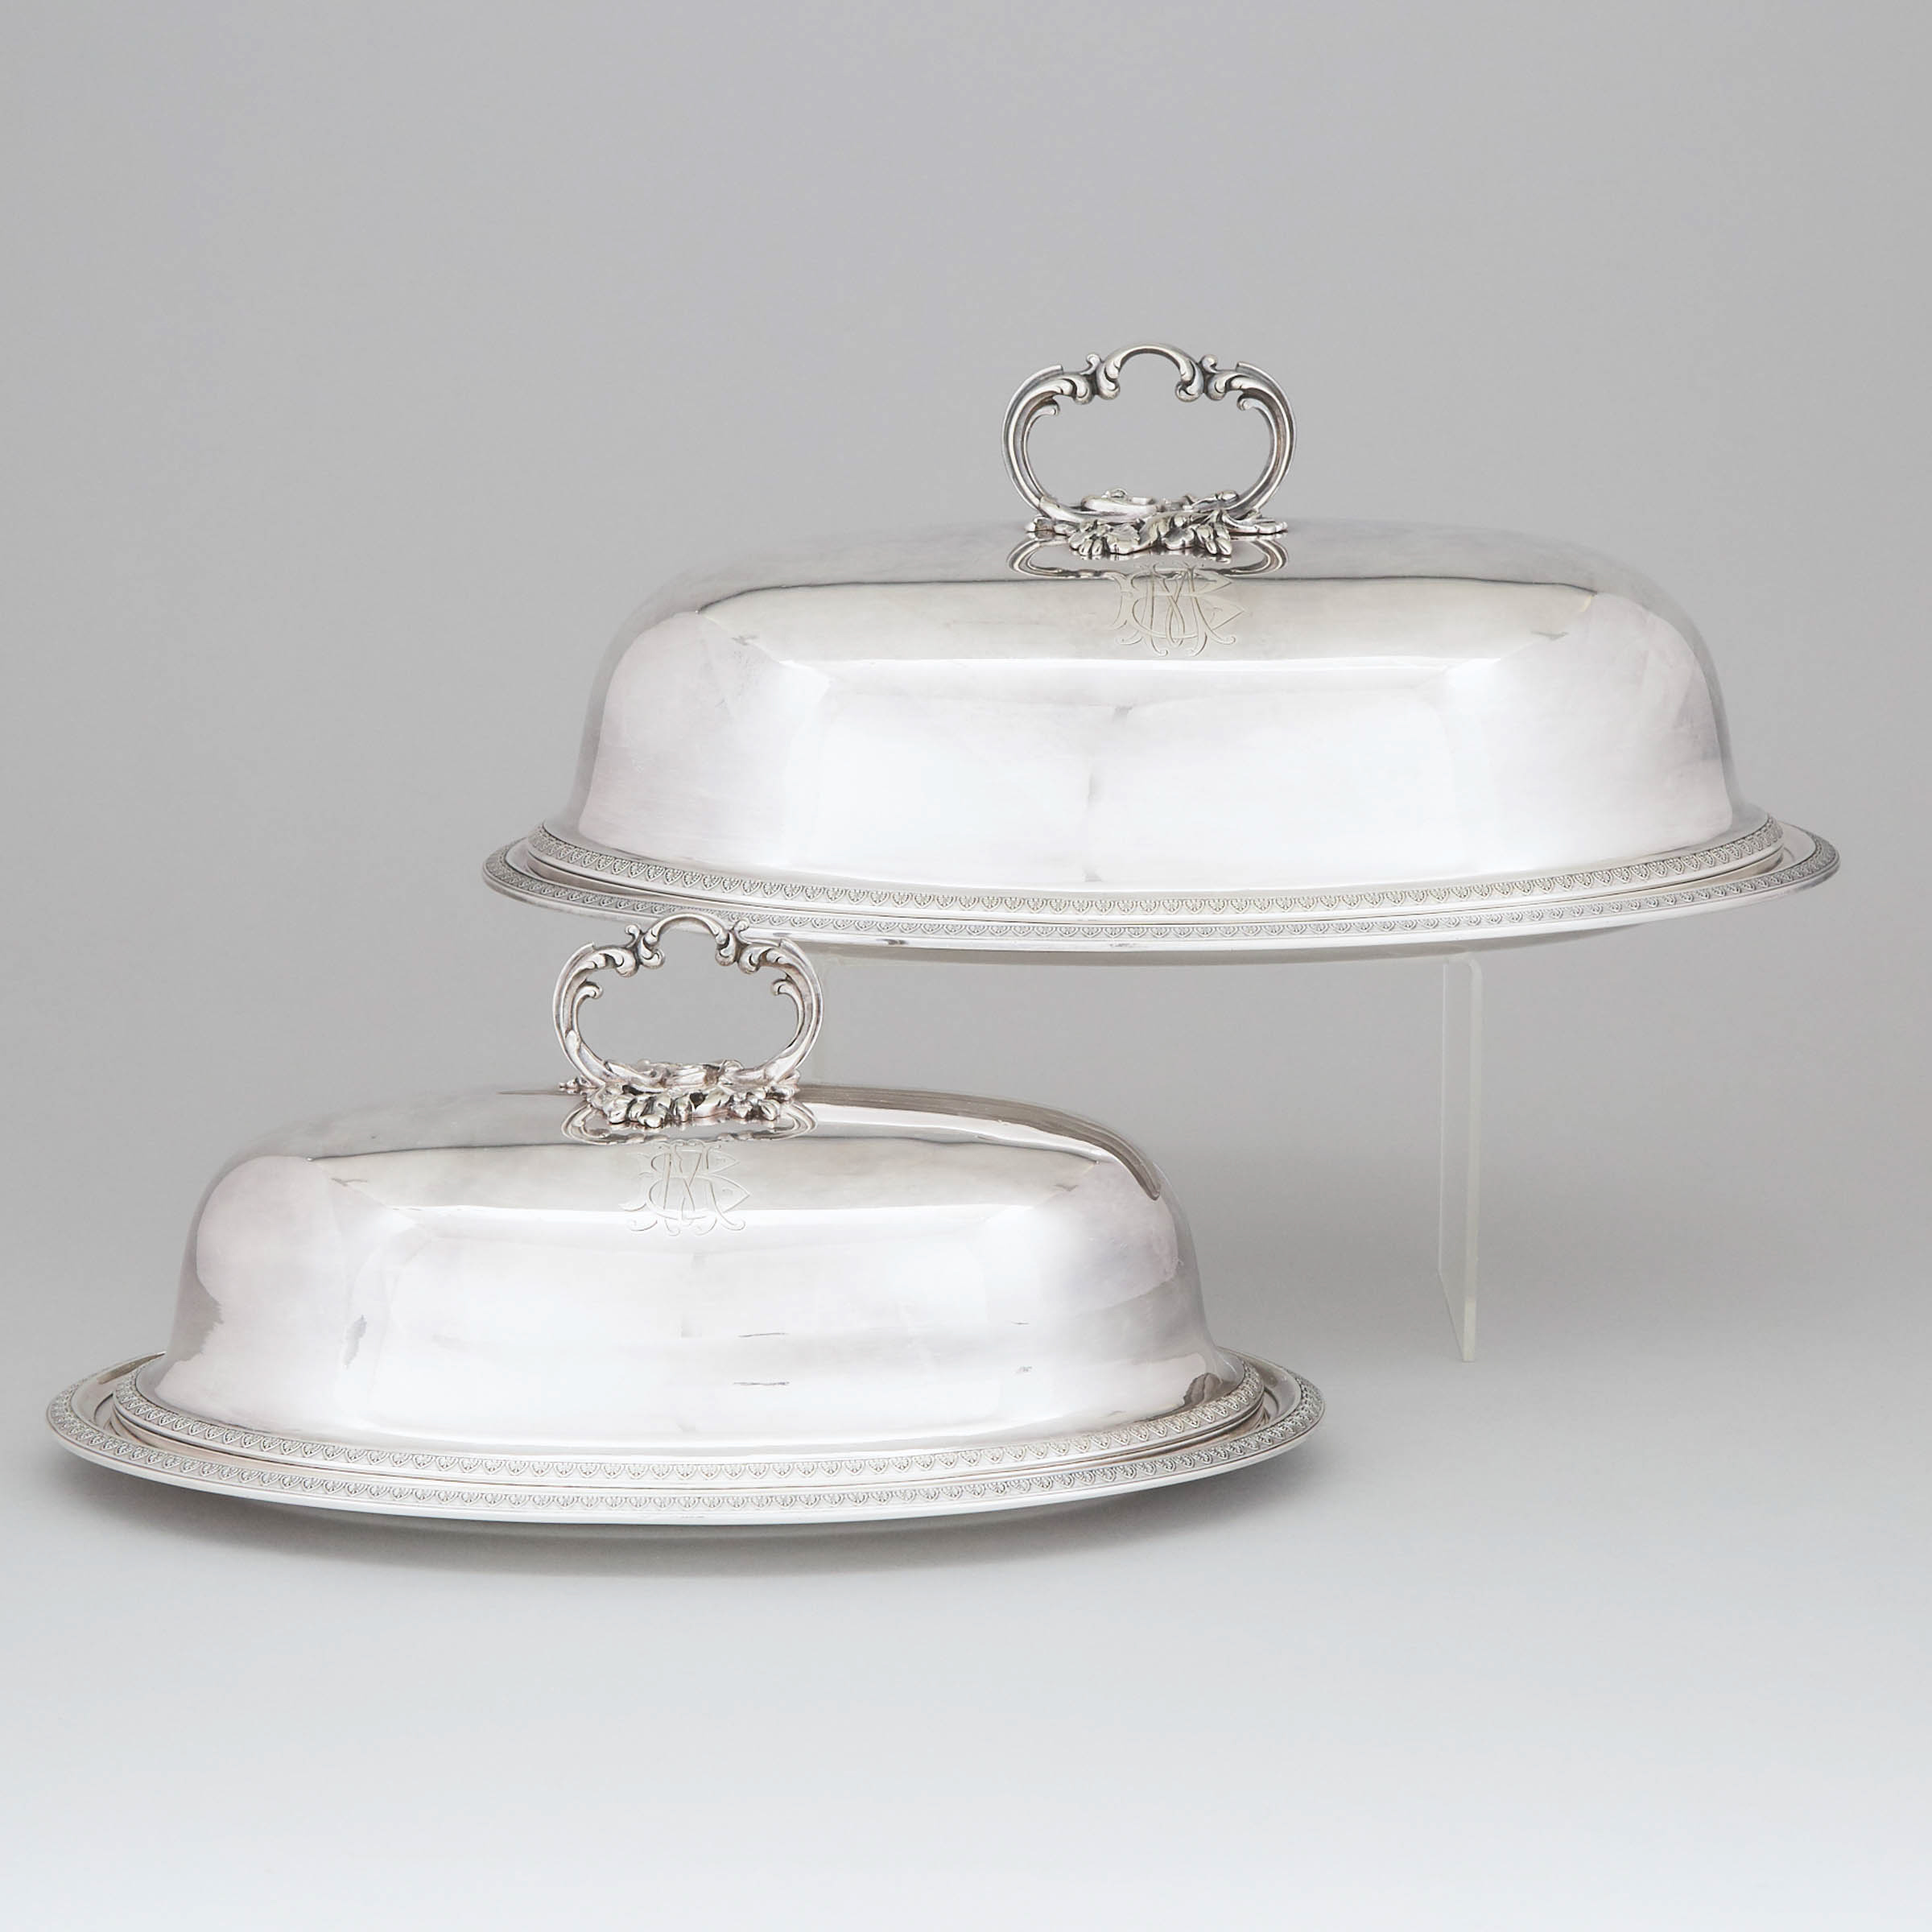 Graduated Pair of French Silver Plated Oval Meat Platters with Domed Covers, Christofle, 20th century